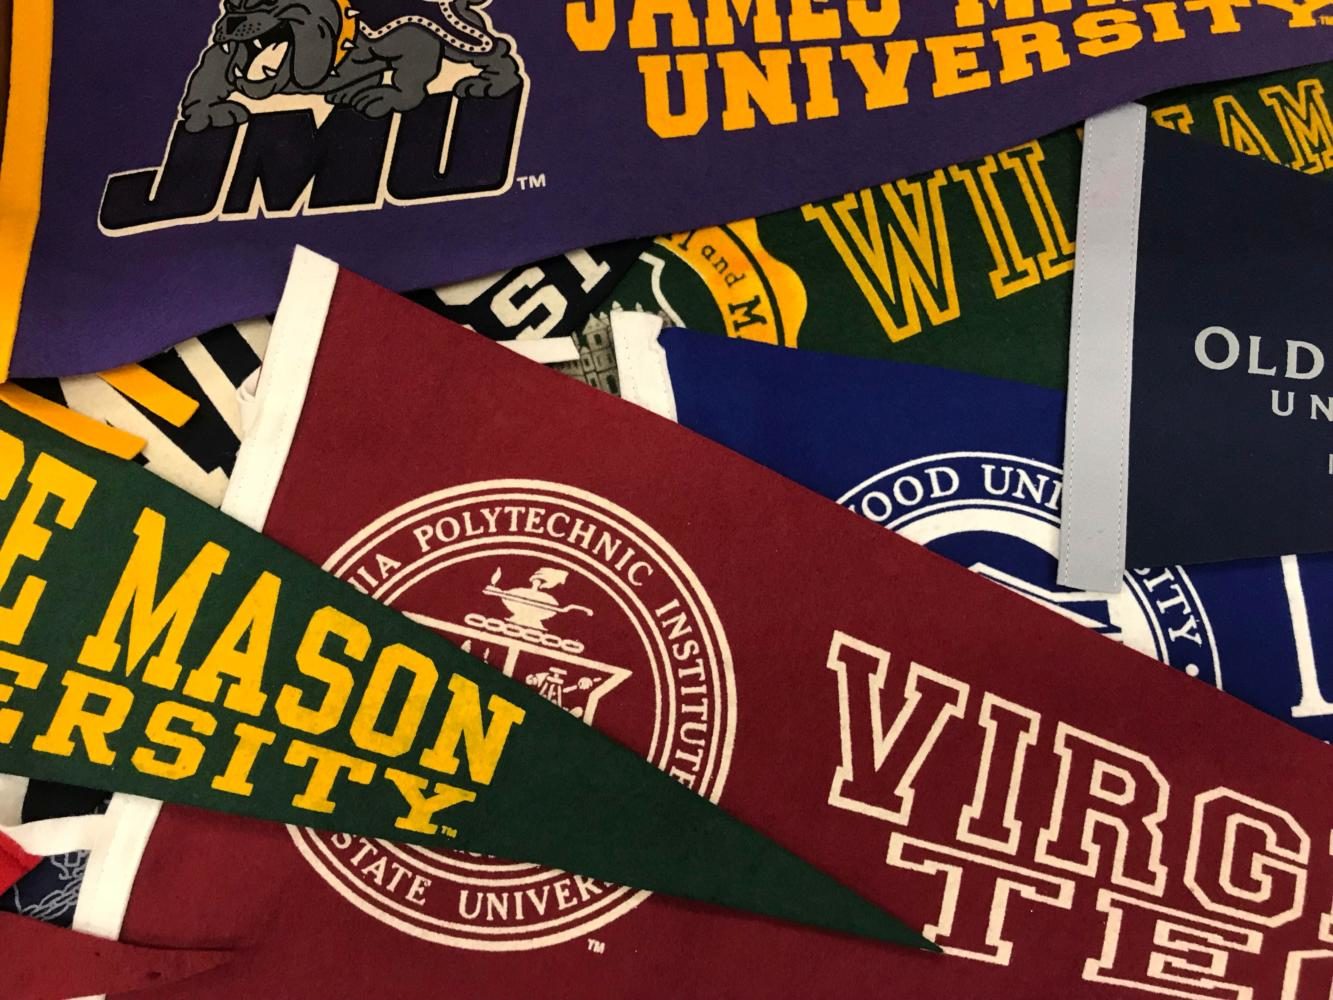 Ms. Martin represents many colleges in her room with colorful banners. 